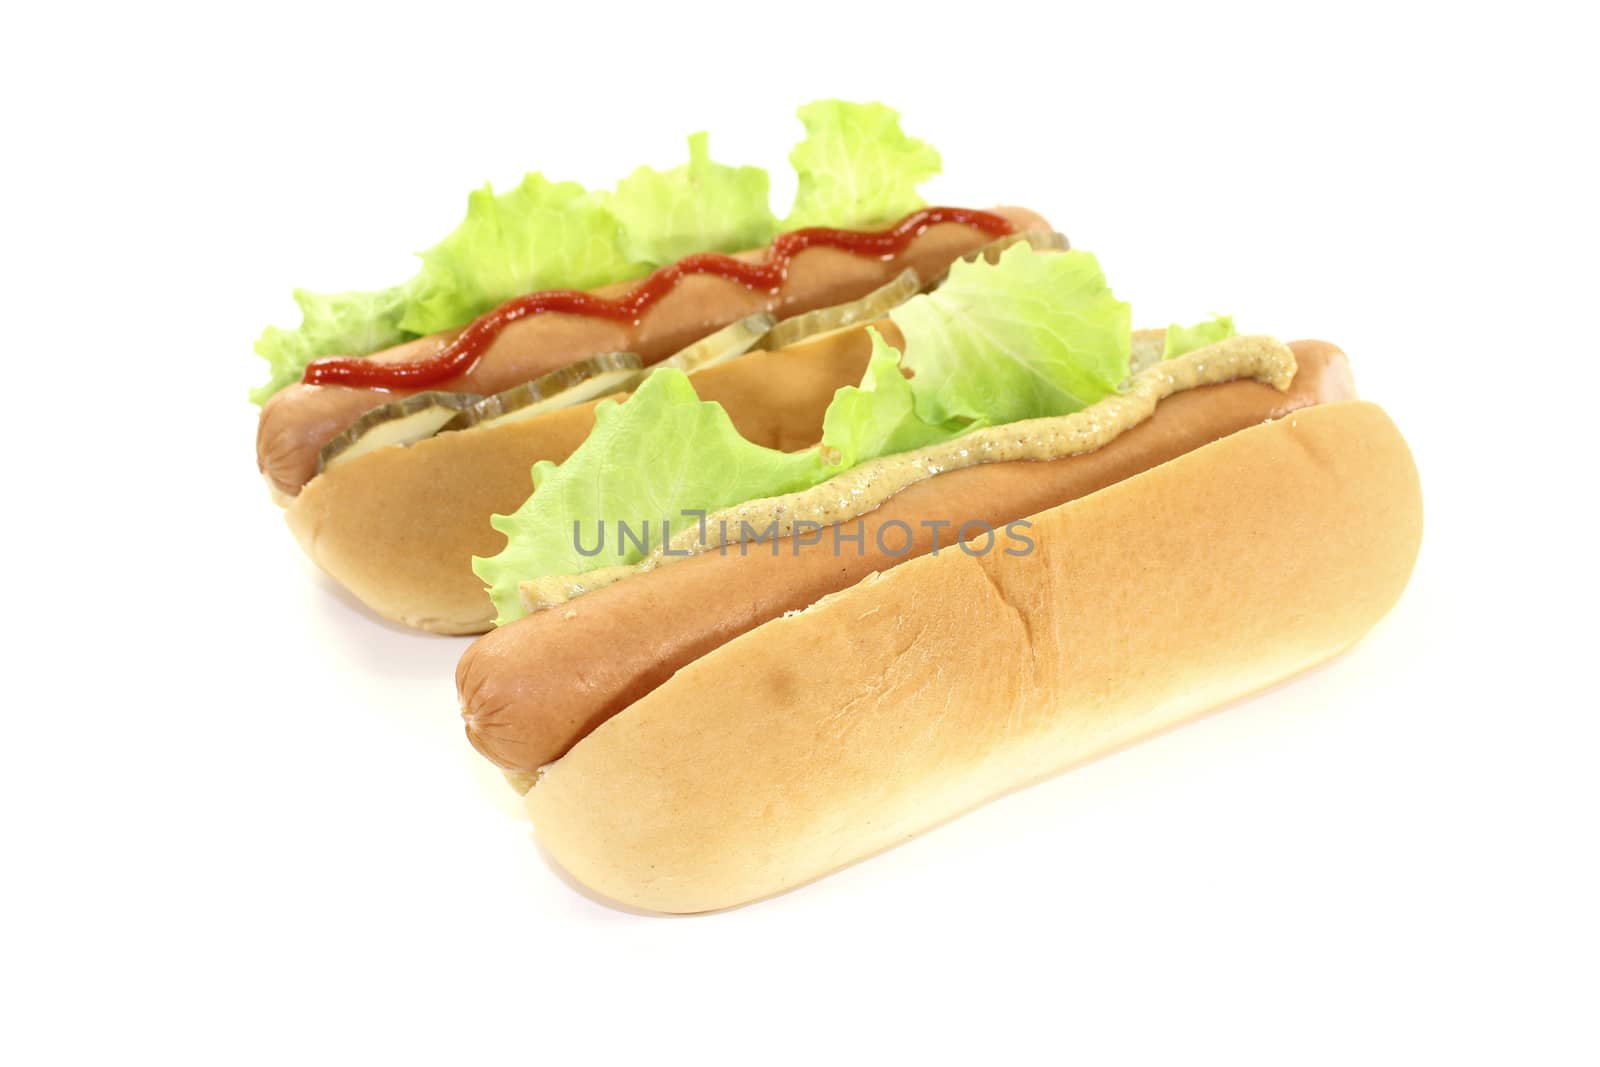 Hot dog with lettuce leaf, sausage, mustard and ketchup